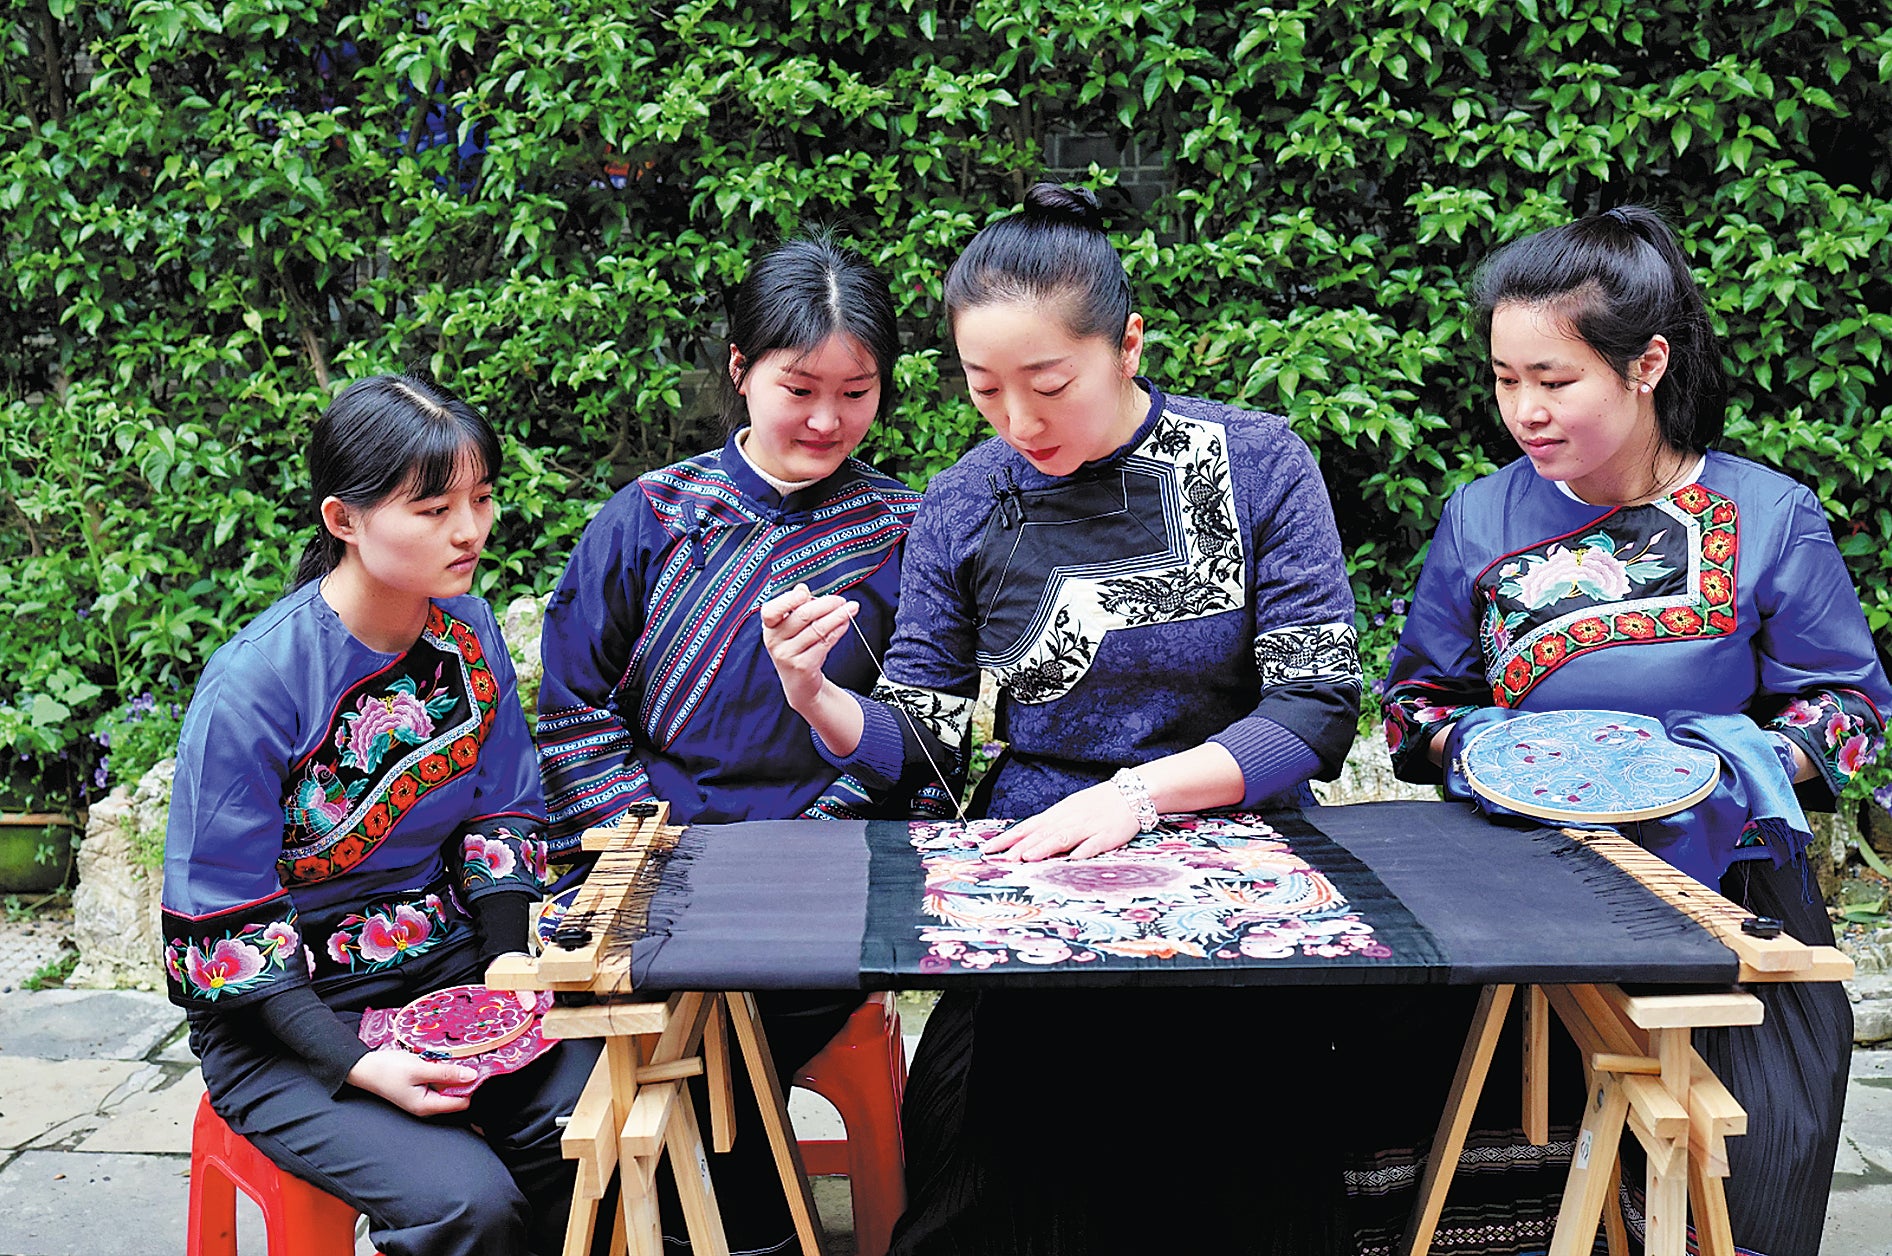 Yi Hua (second from right) demonstrates and explains Miao embroidery to local young women in Xiangxi Tujia and Miao autonomous prefecture, Hunan province